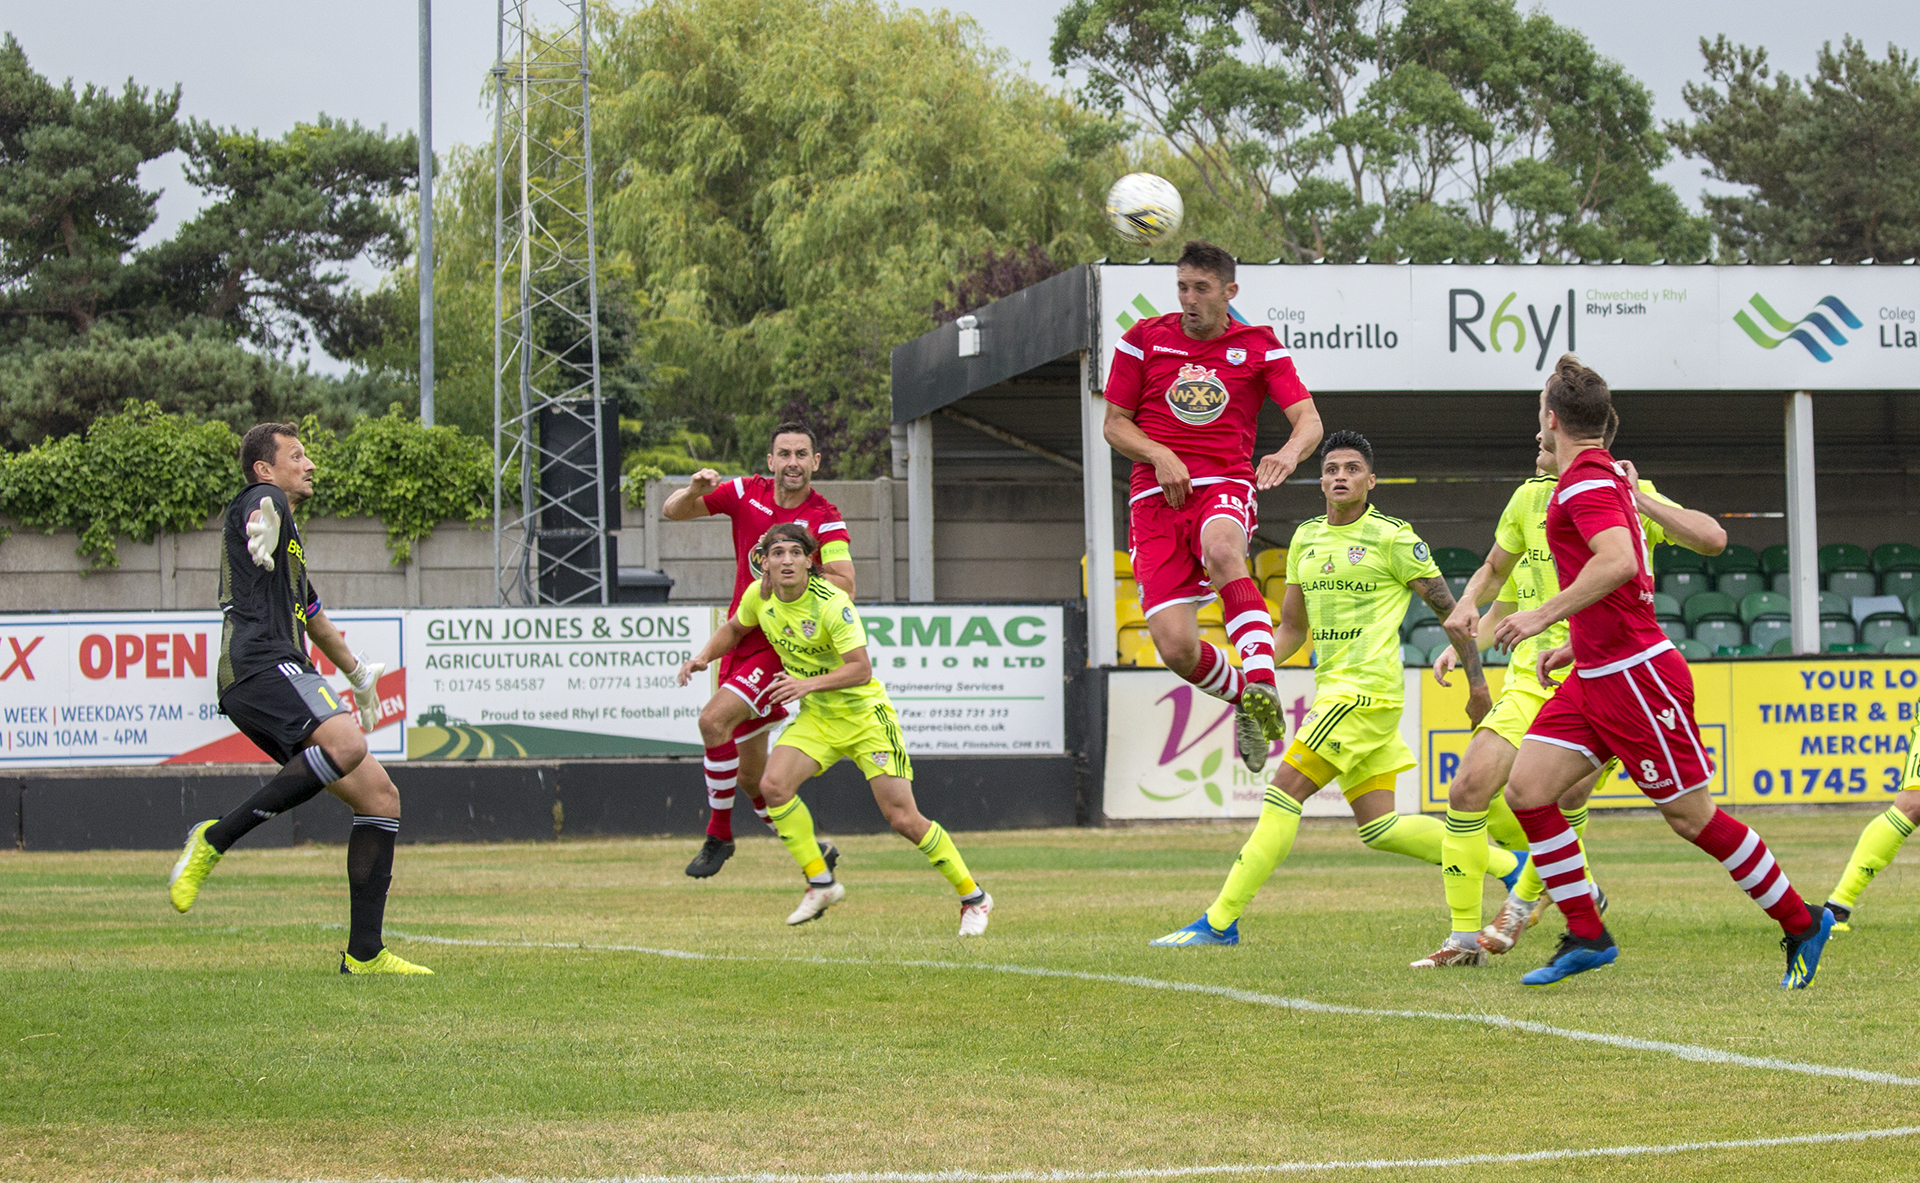 Andy Owens heads for goal in the first half © NCM Media